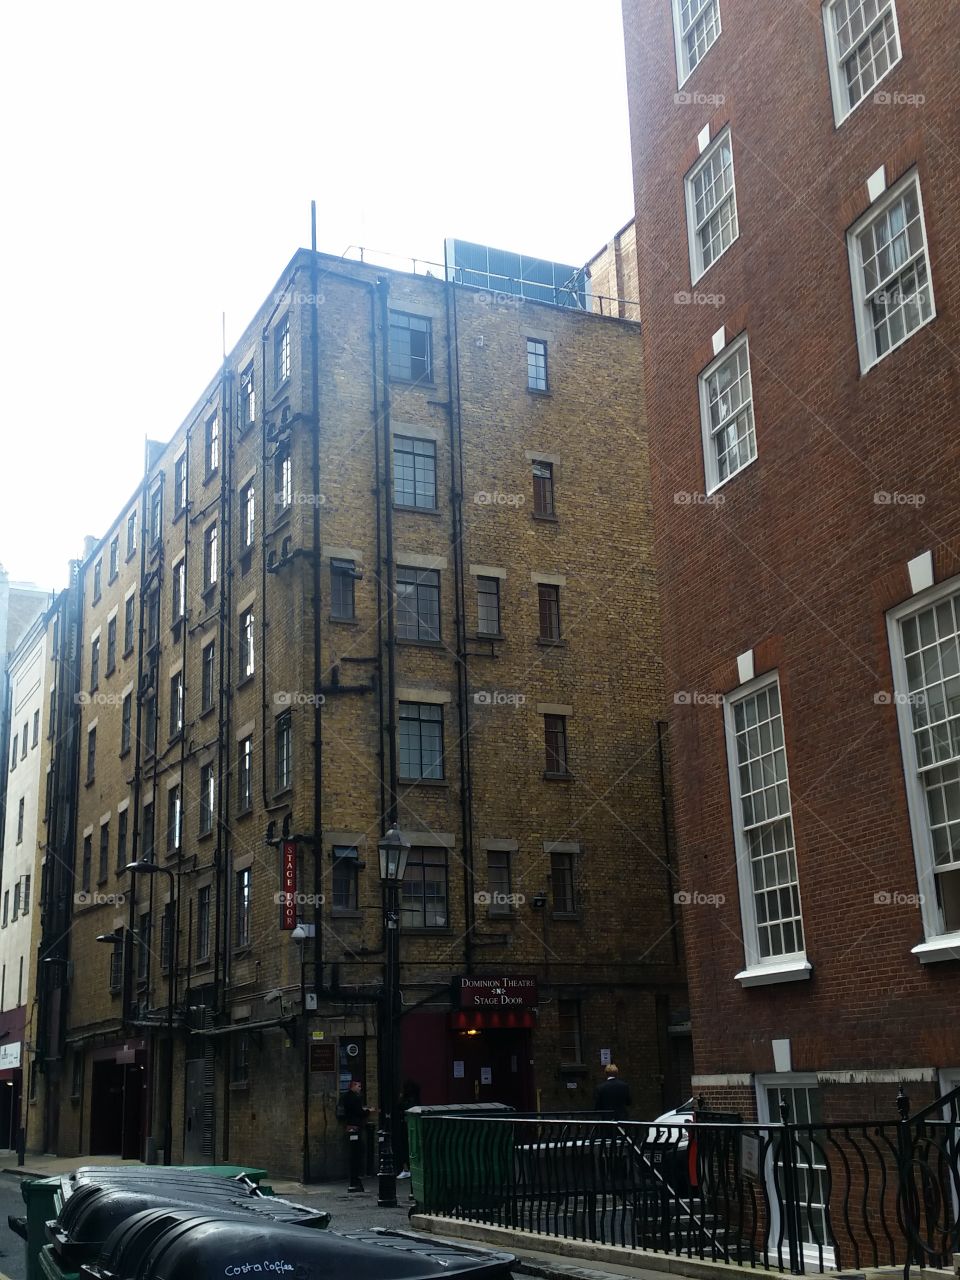 Old Buildings in the backstreets of London.